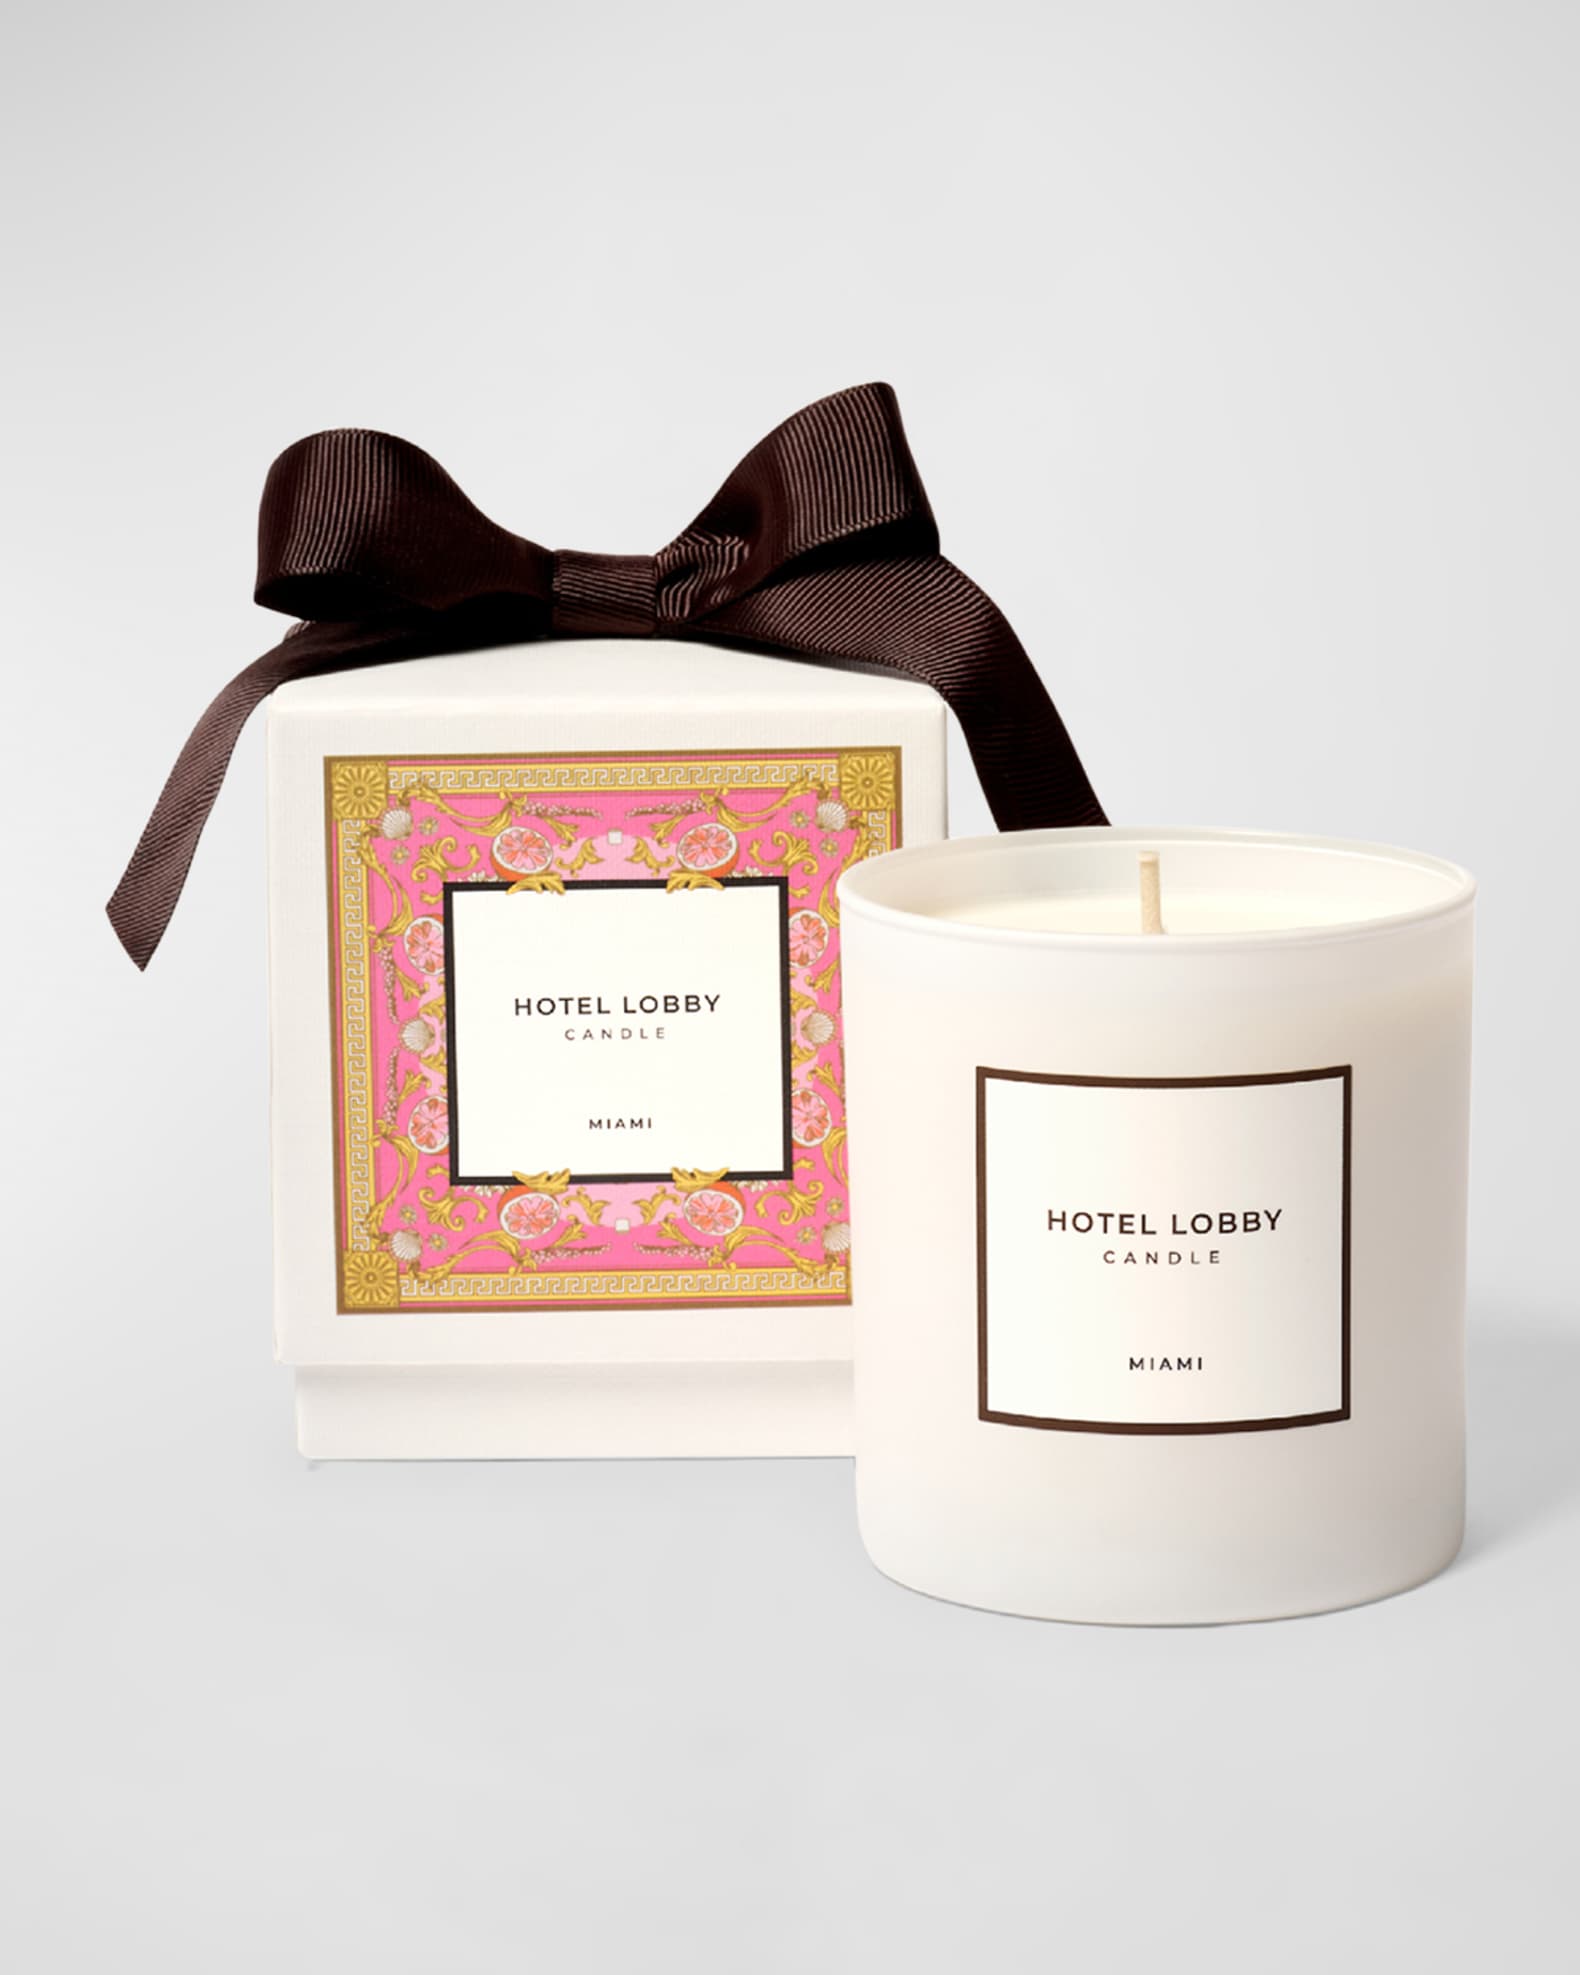 Hotel Lobby Candle 9.75 oz. Miami Candle | Neiman Marcus